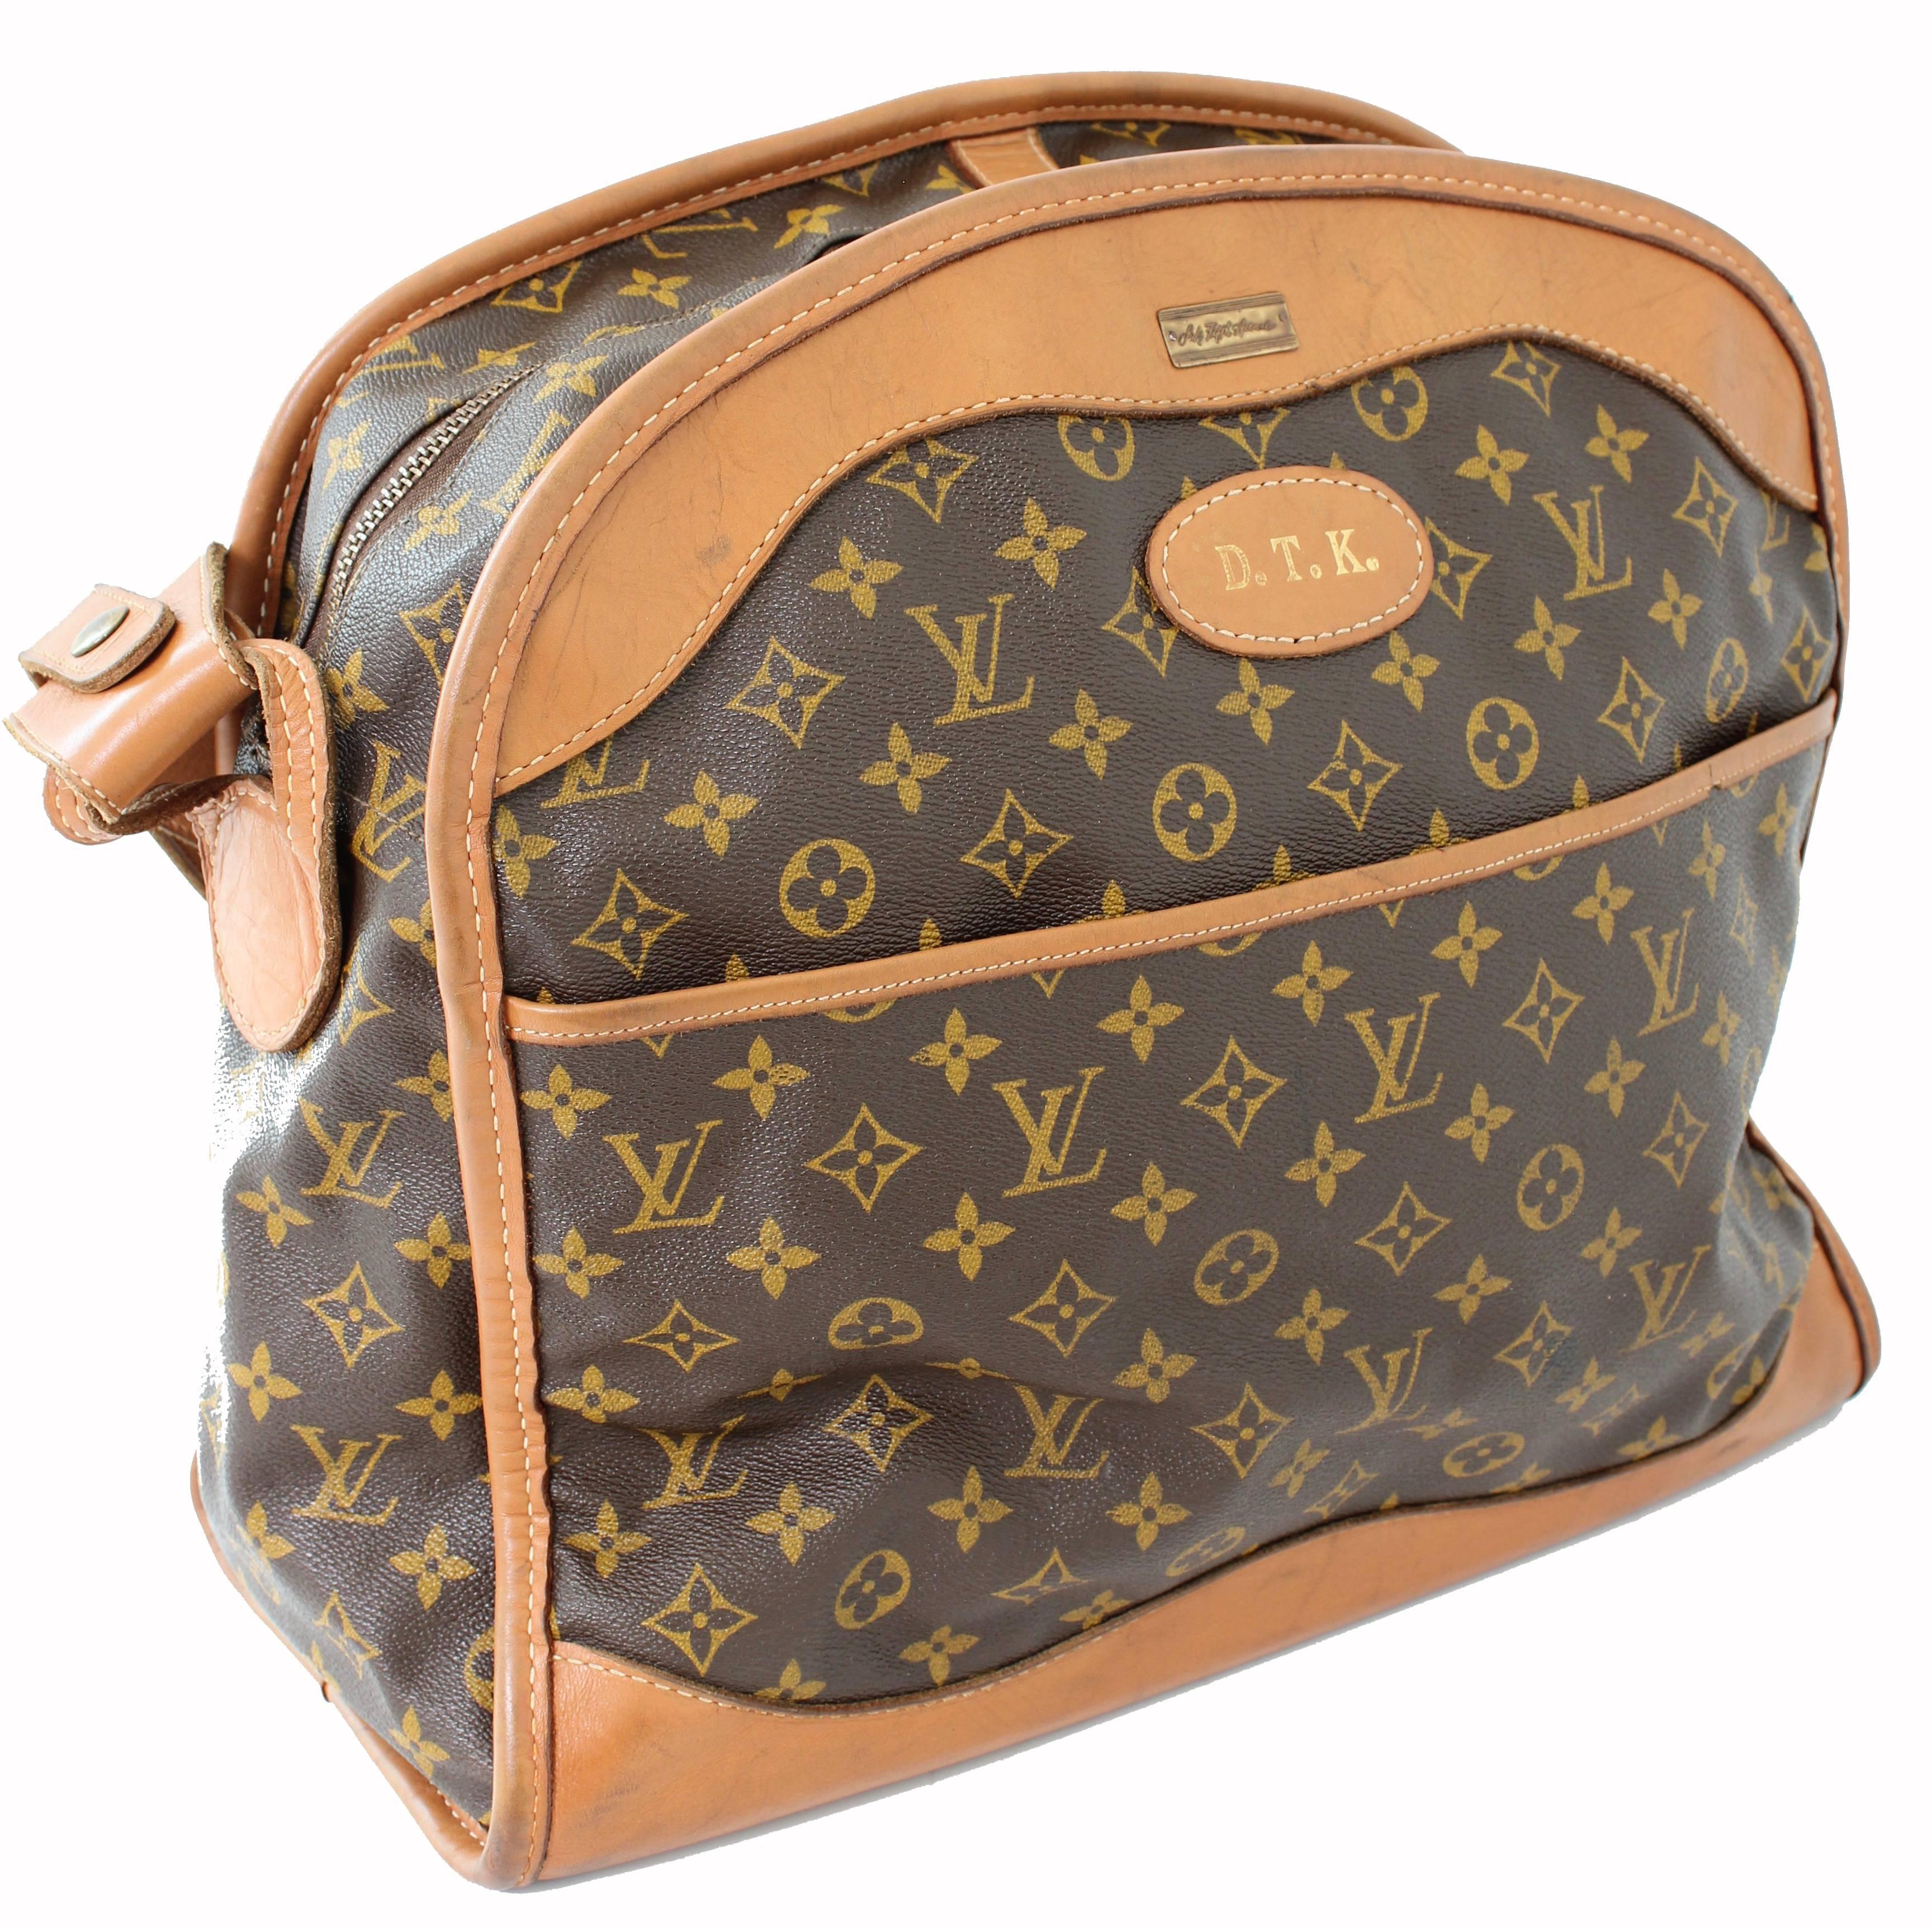 Louis Vuitton America's Cup Duffle Travel Overnight Bag LV-1118P-0001